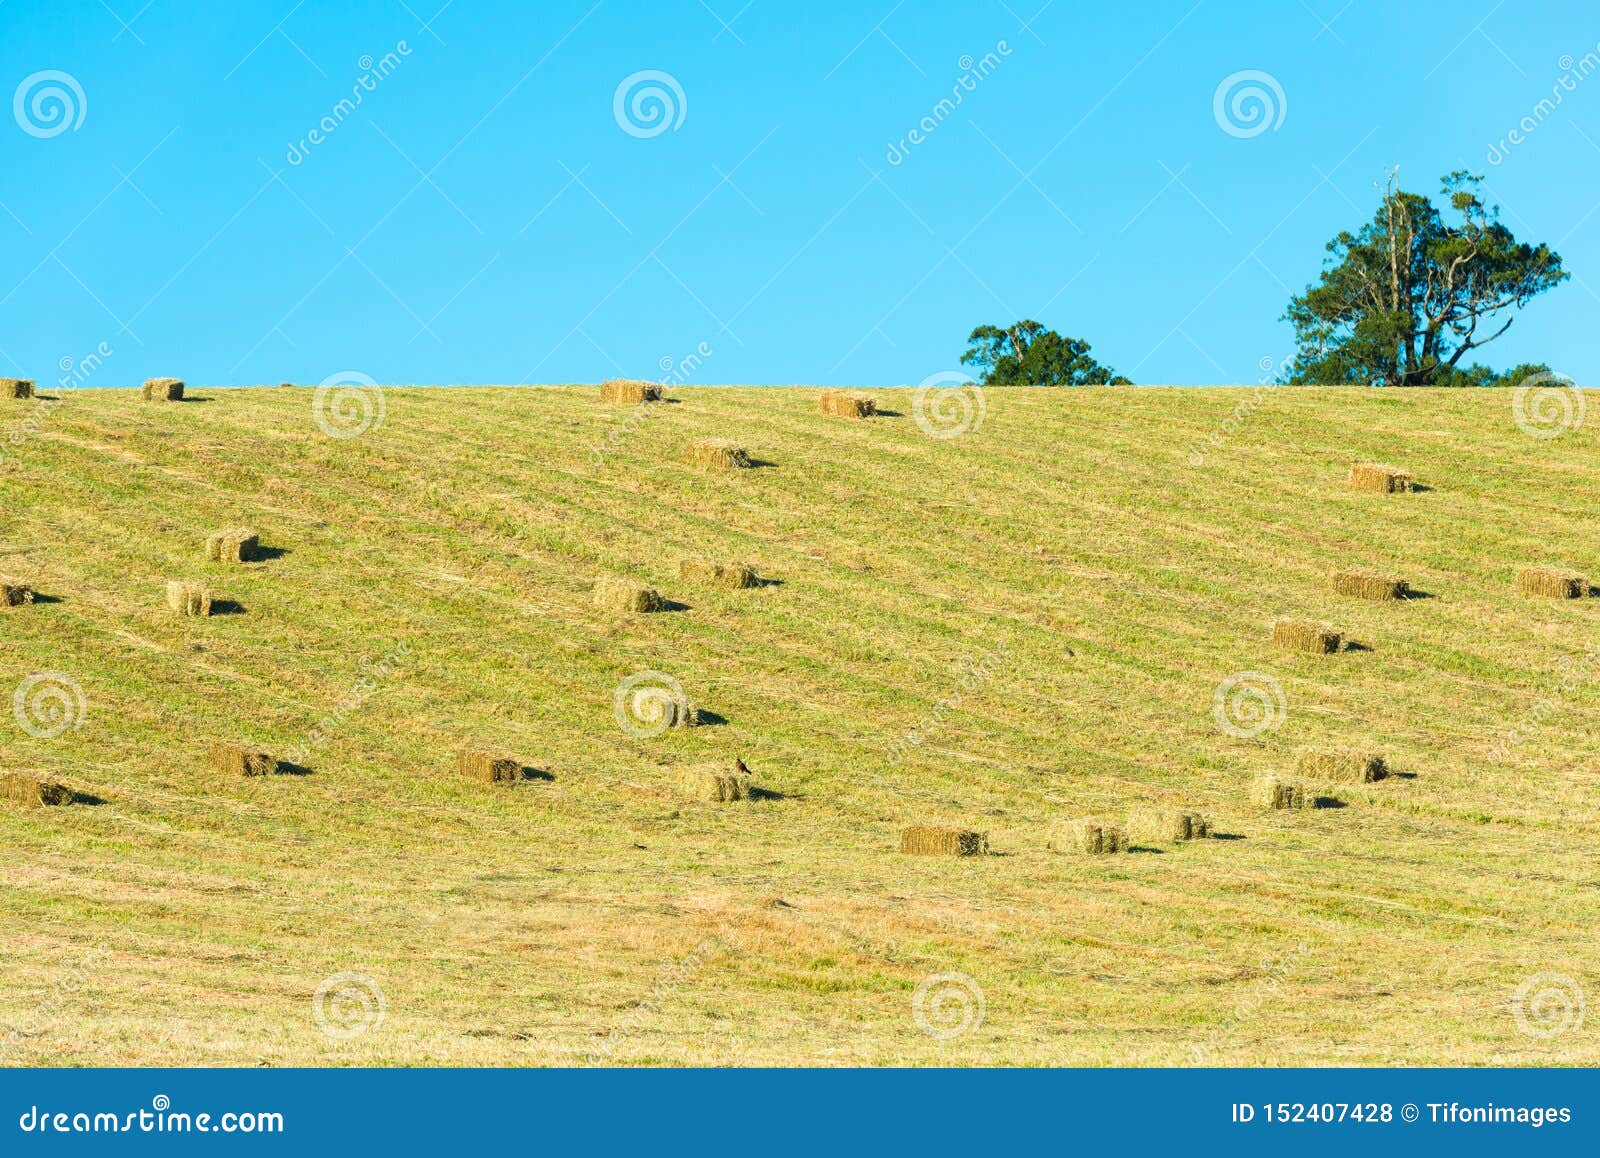 hay bales in the field, chile